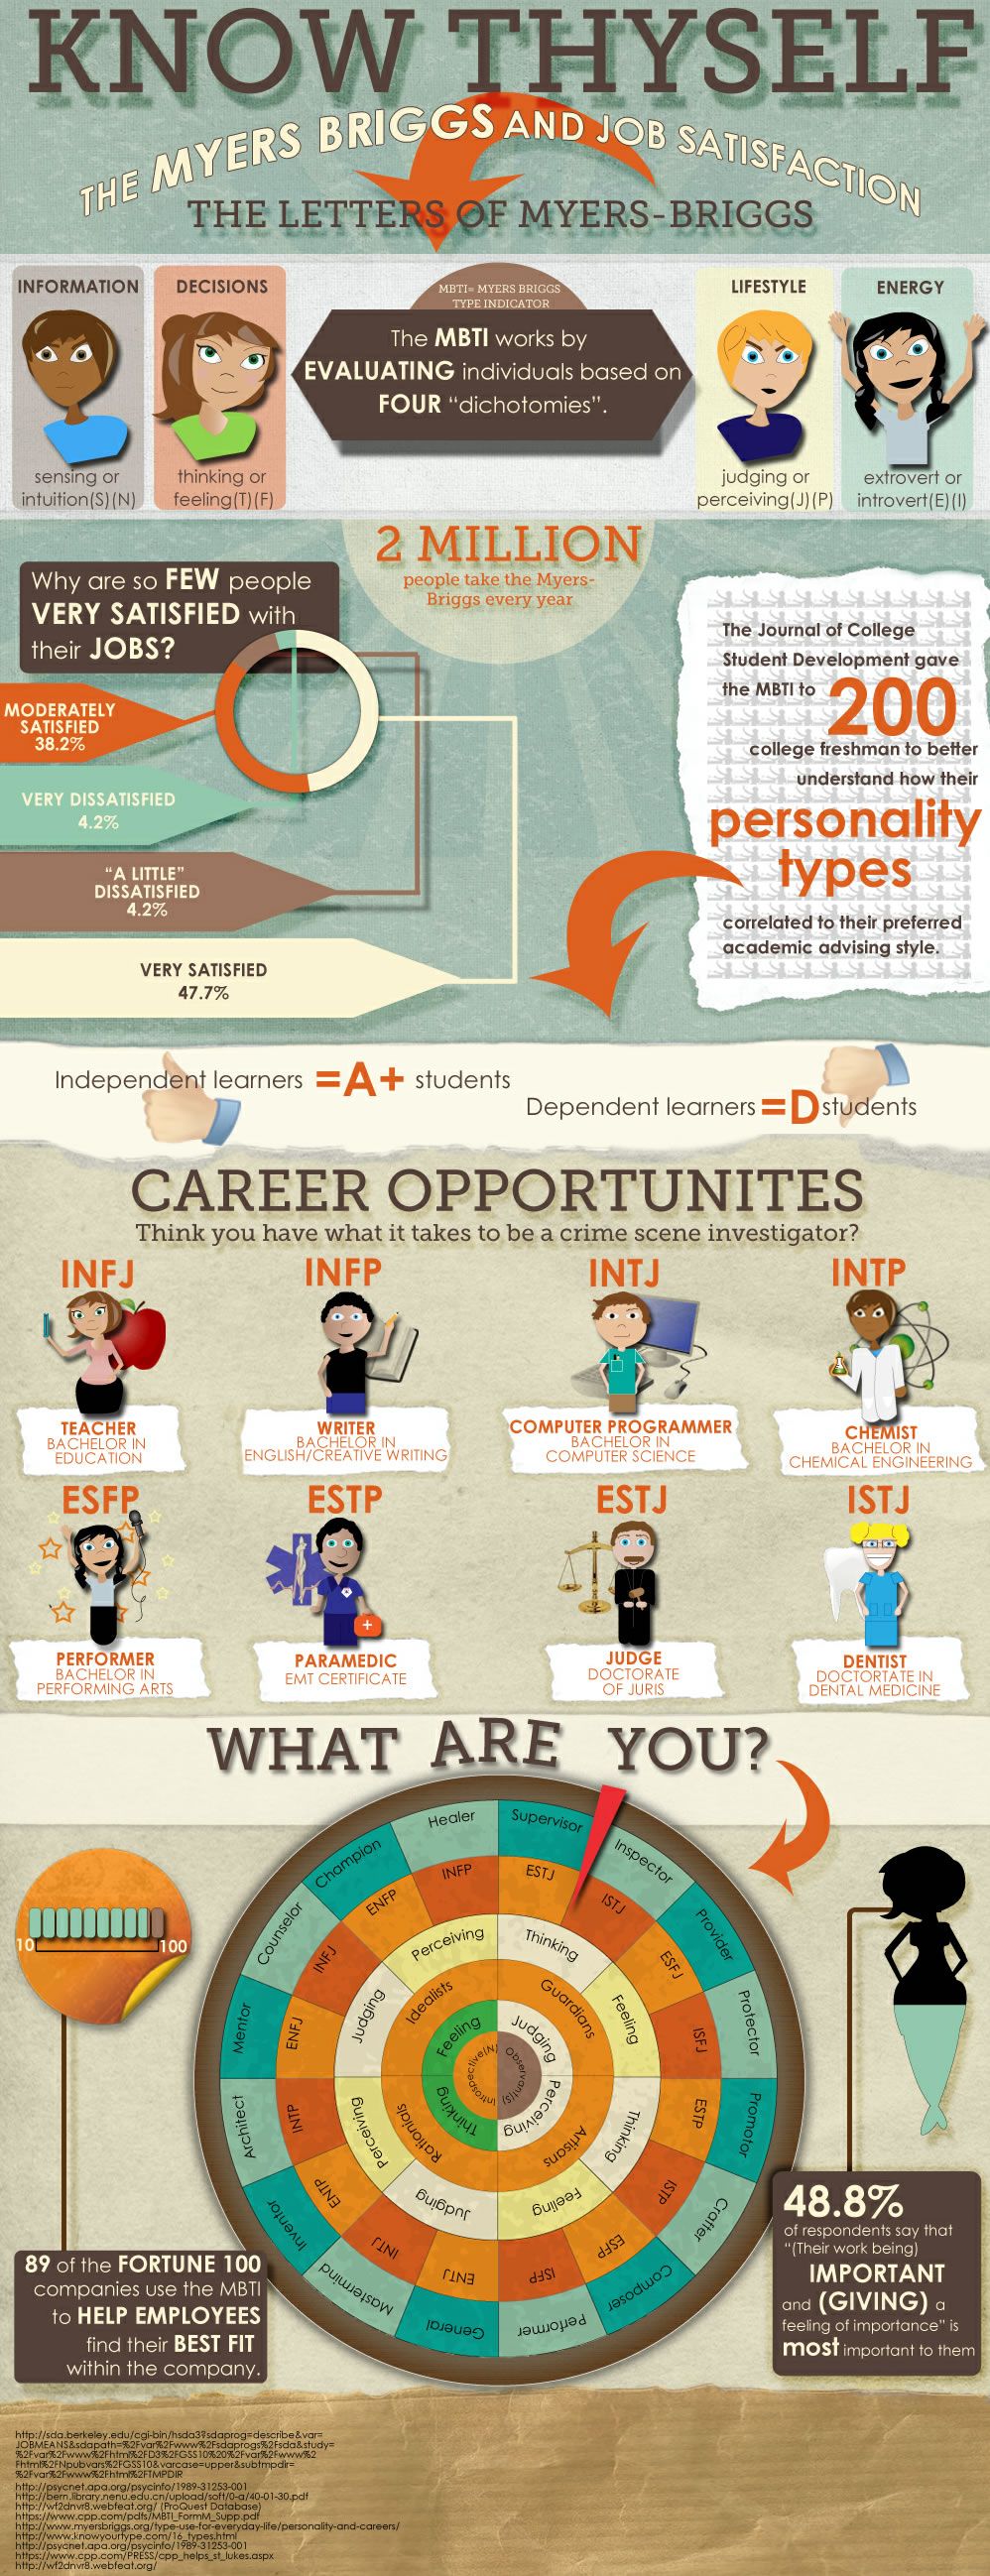 How Your Myers Briggs Type Determines Your Career Path